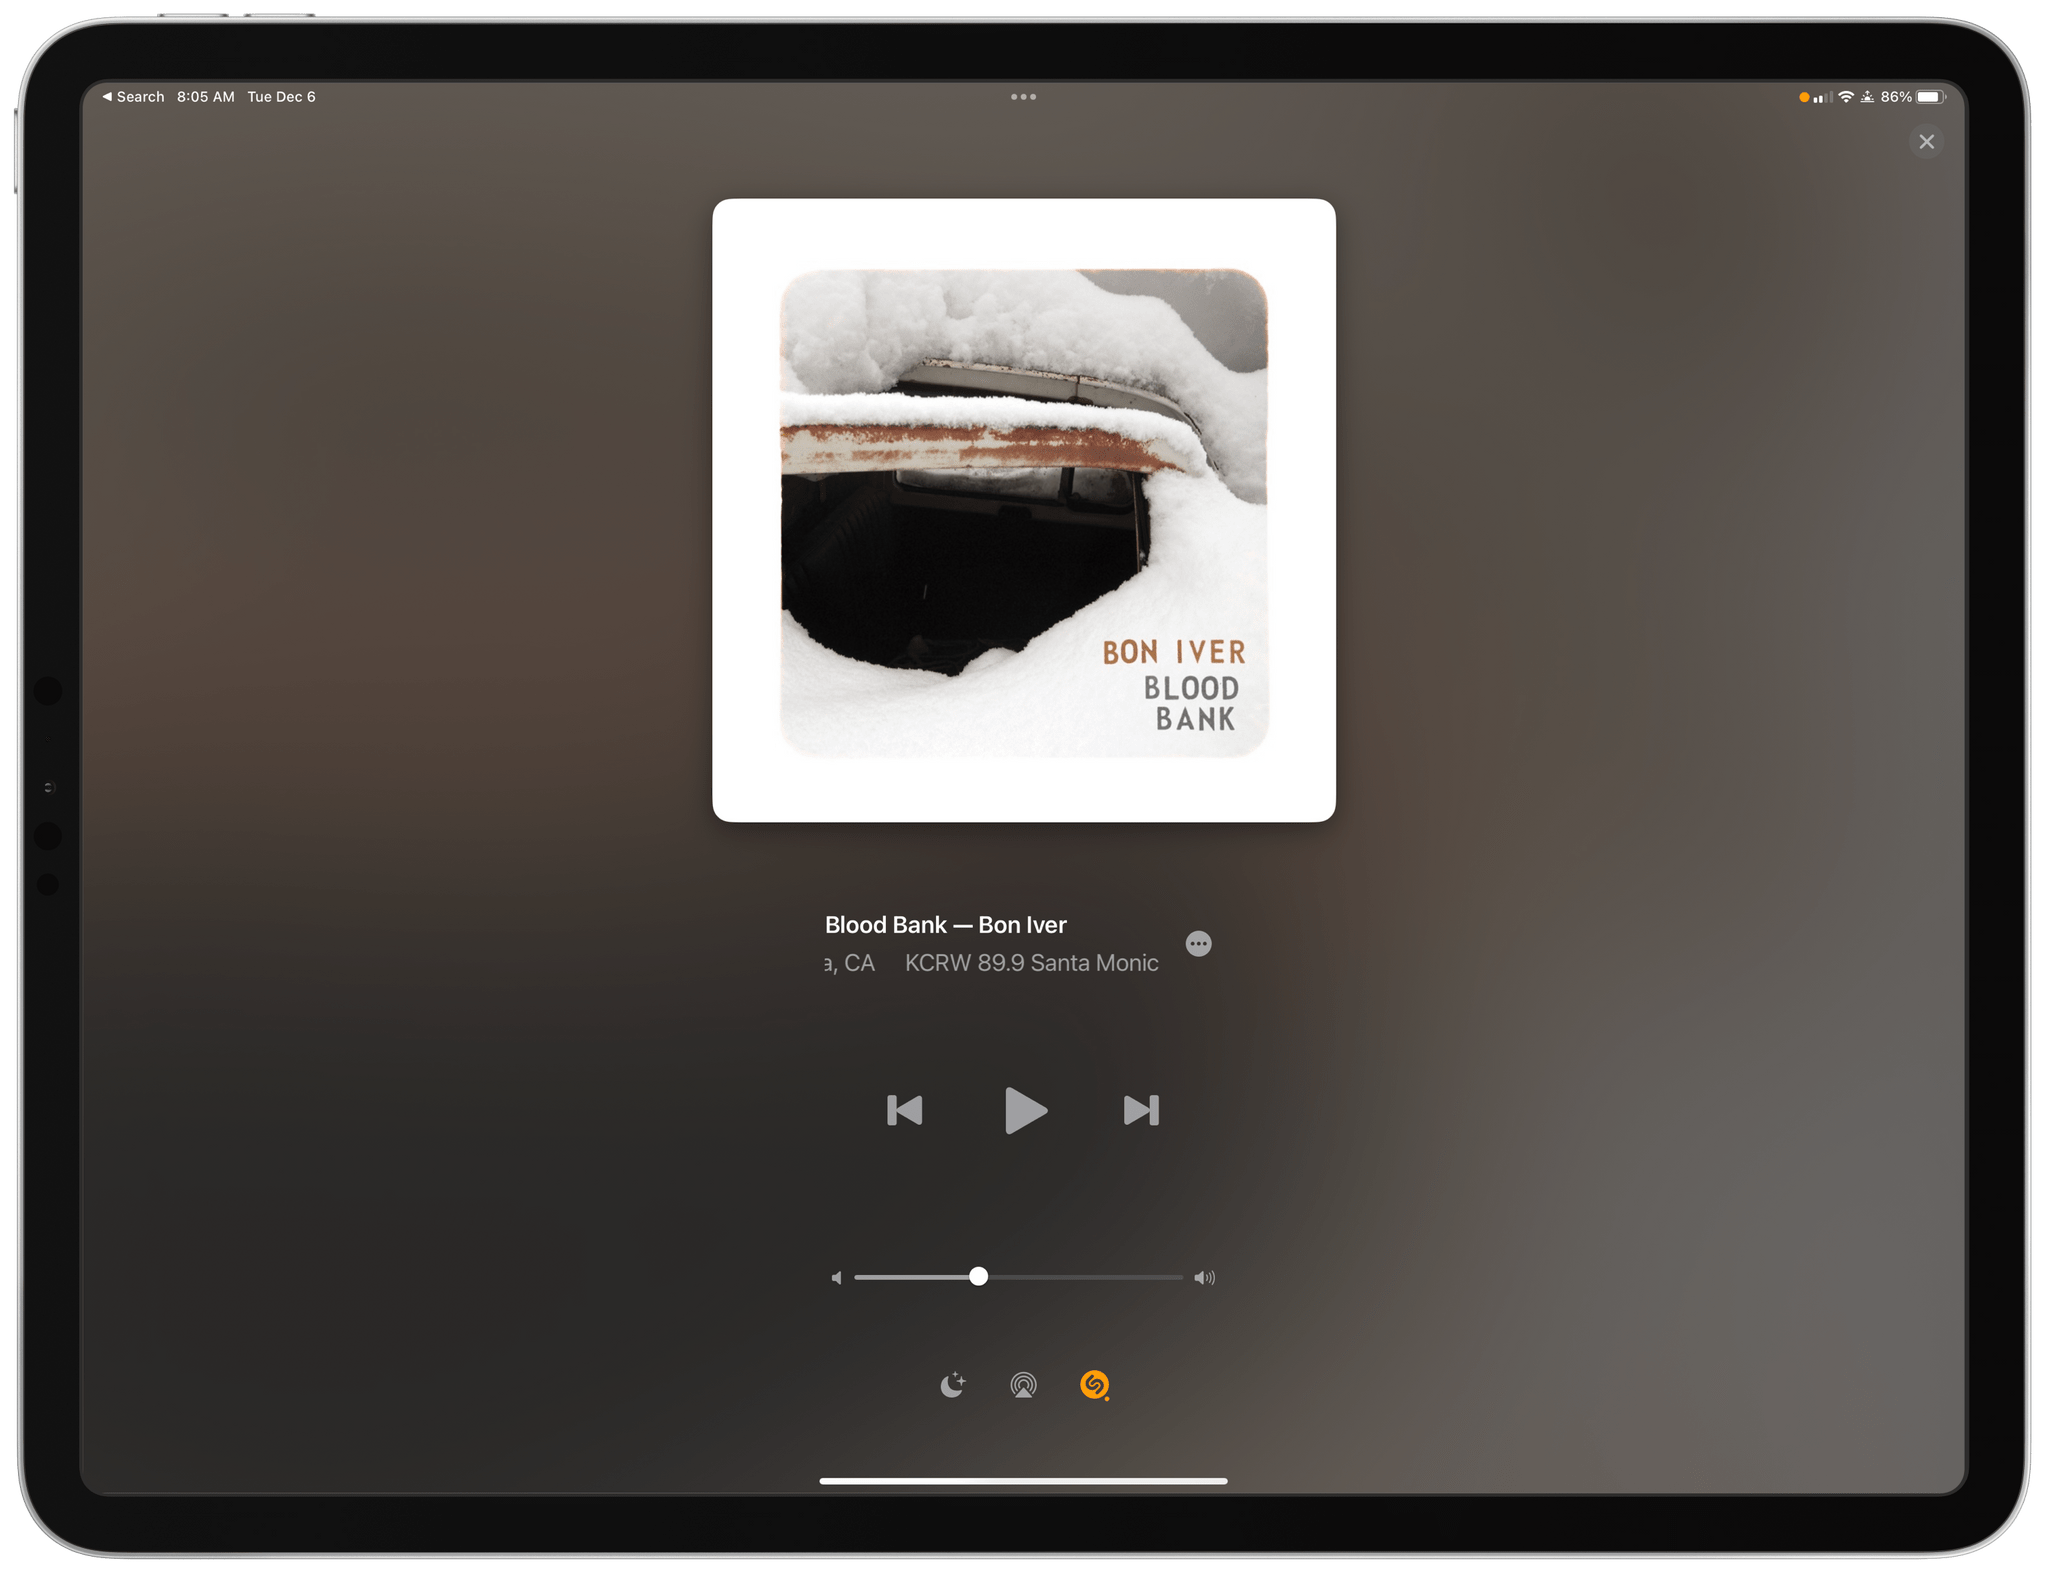 Using the iPad Pro and Broadcasts' Shazam integration to monitor a station playing on my Mac in the app's miniplayer.